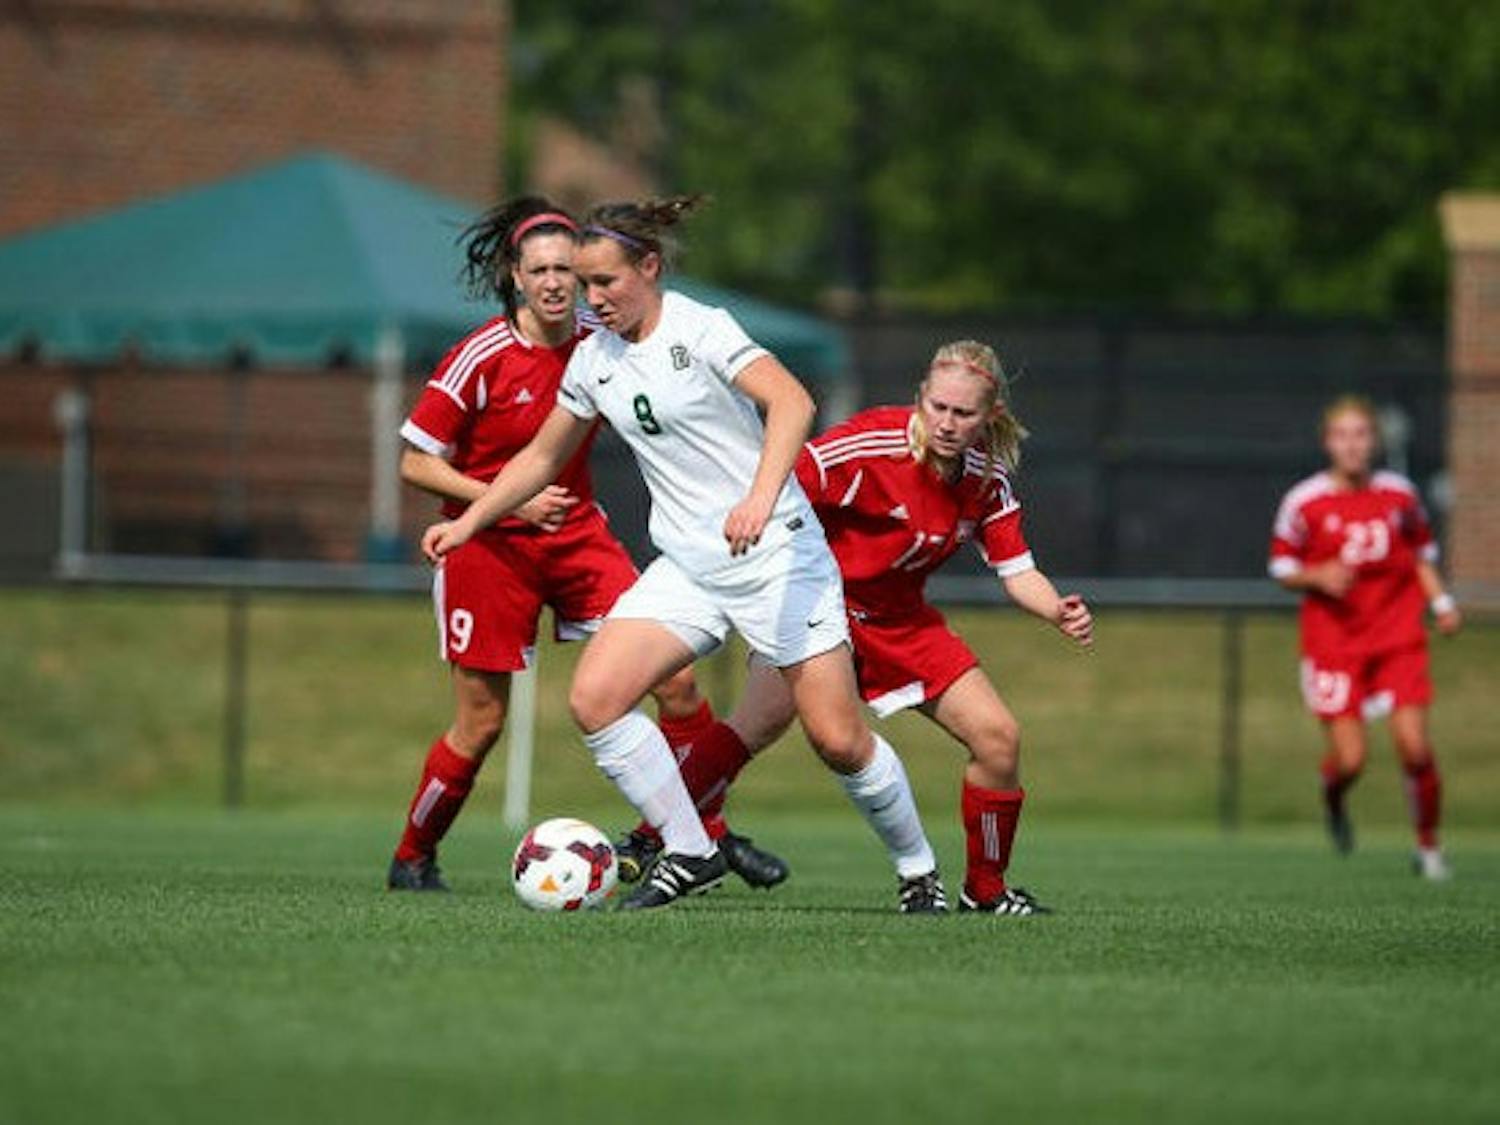 Holly Patterson '17 comes to Hanover from the New Zealand national team.